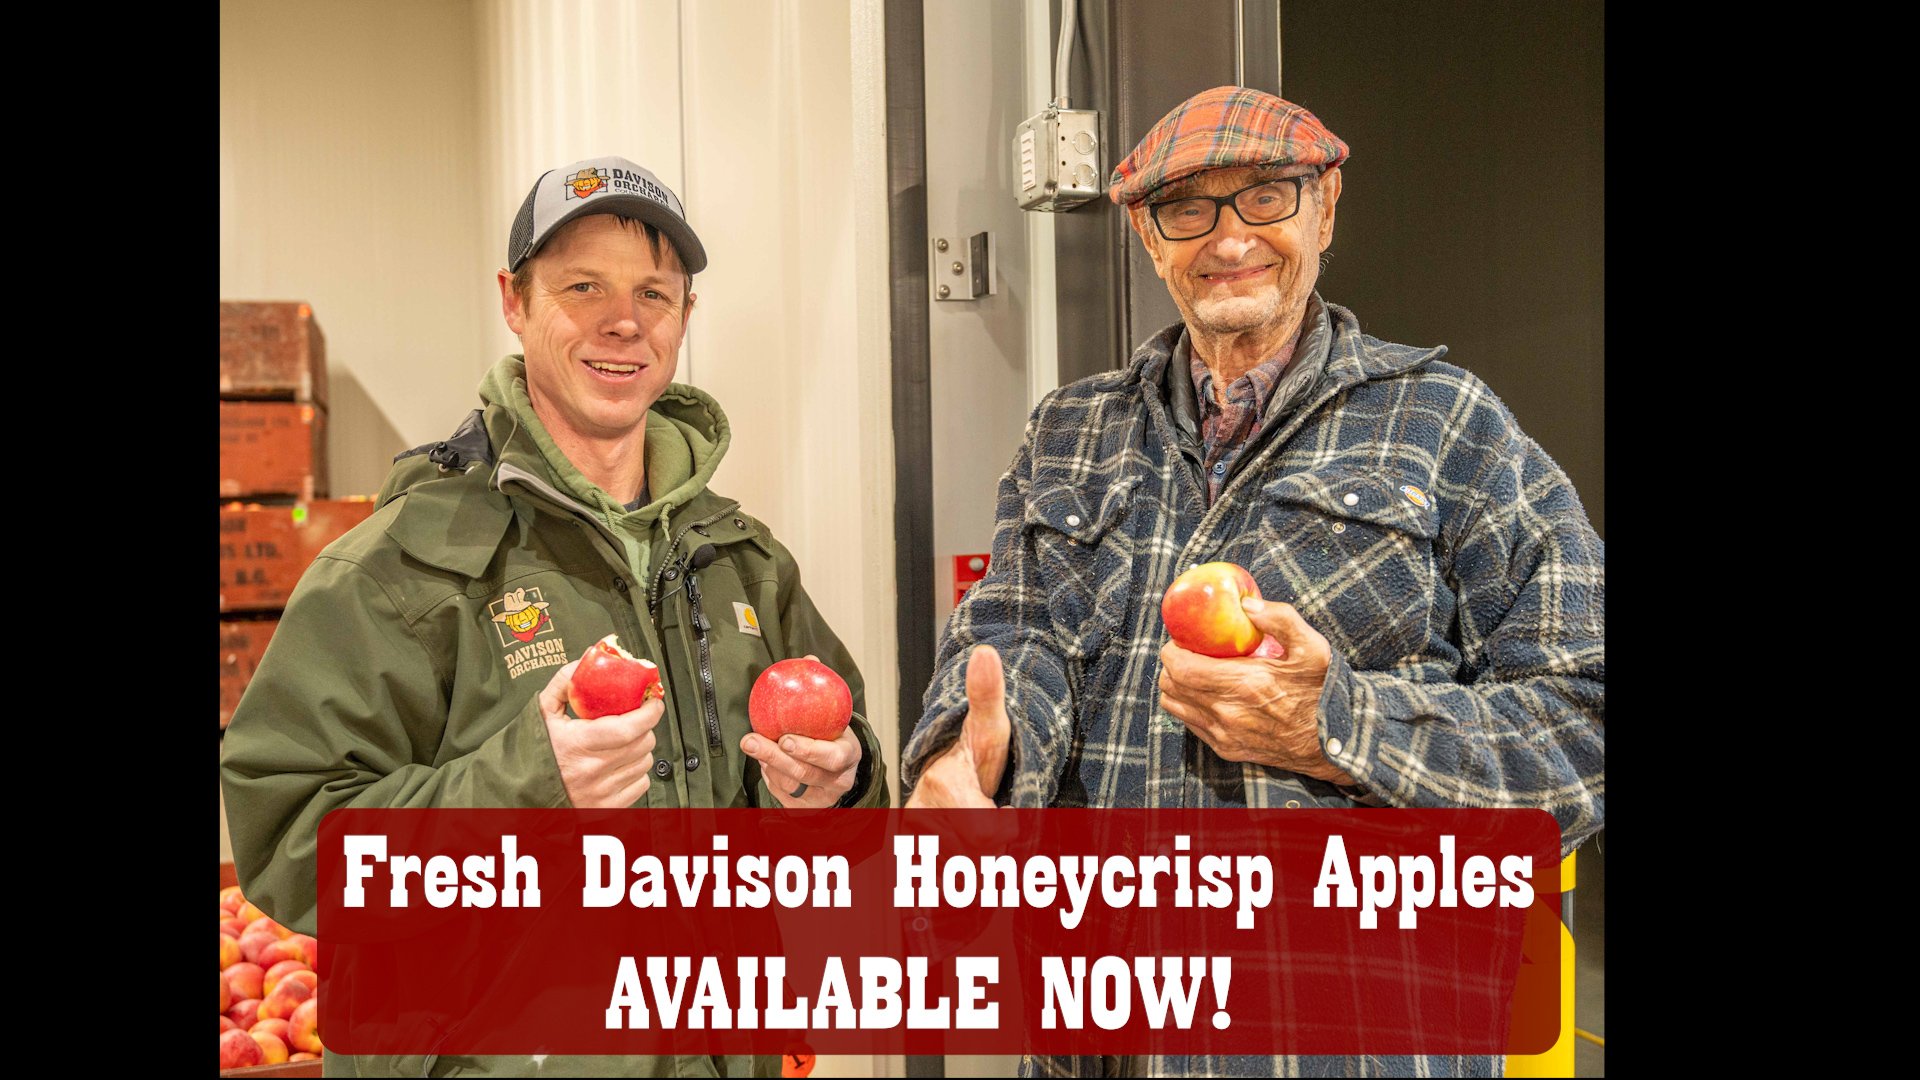 🍎Fresh Davison Honeycrisp Apples available tomorrow!😁

Believe it or not, and for the first time ever, we have Davison Honeycrisp Apples 🍯 on sale from our opening, Wednesday May 1st 📢
We have a new technology in Davison Orchards. It is a Control